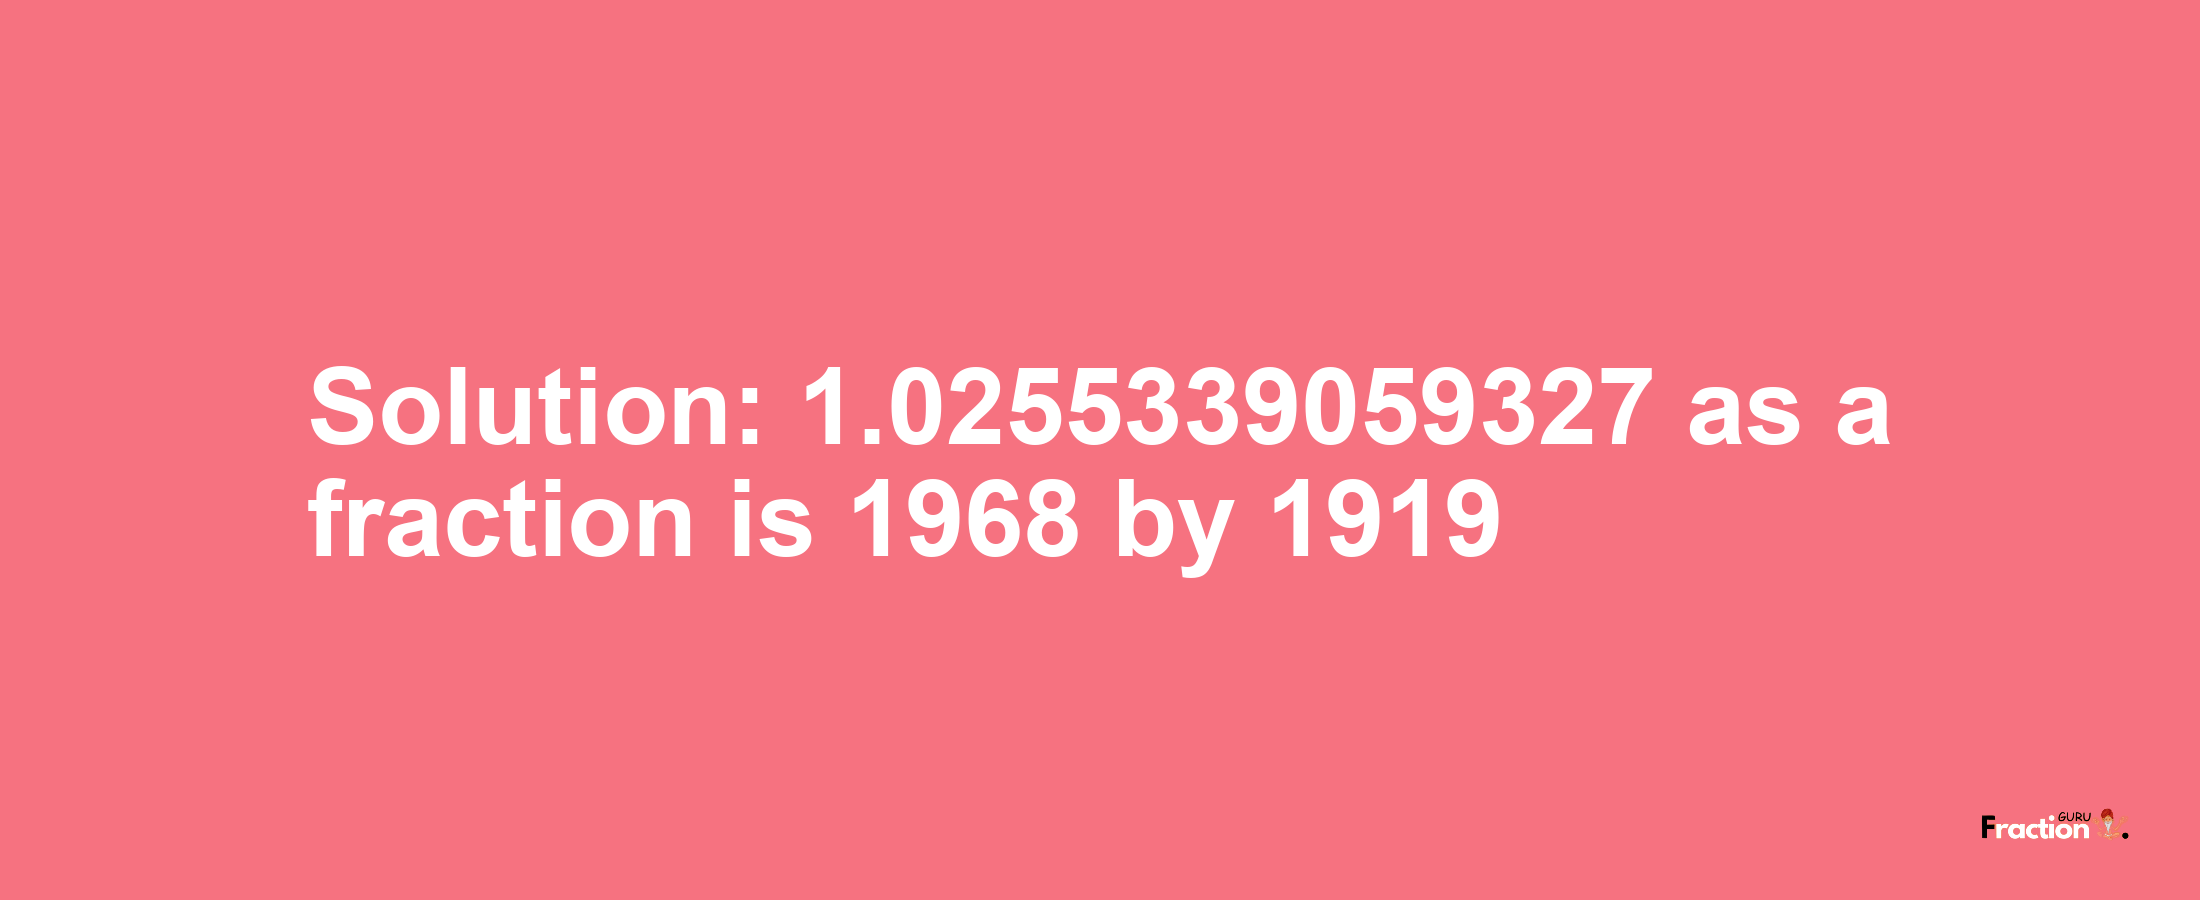 Solution:1.0255339059327 as a fraction is 1968/1919